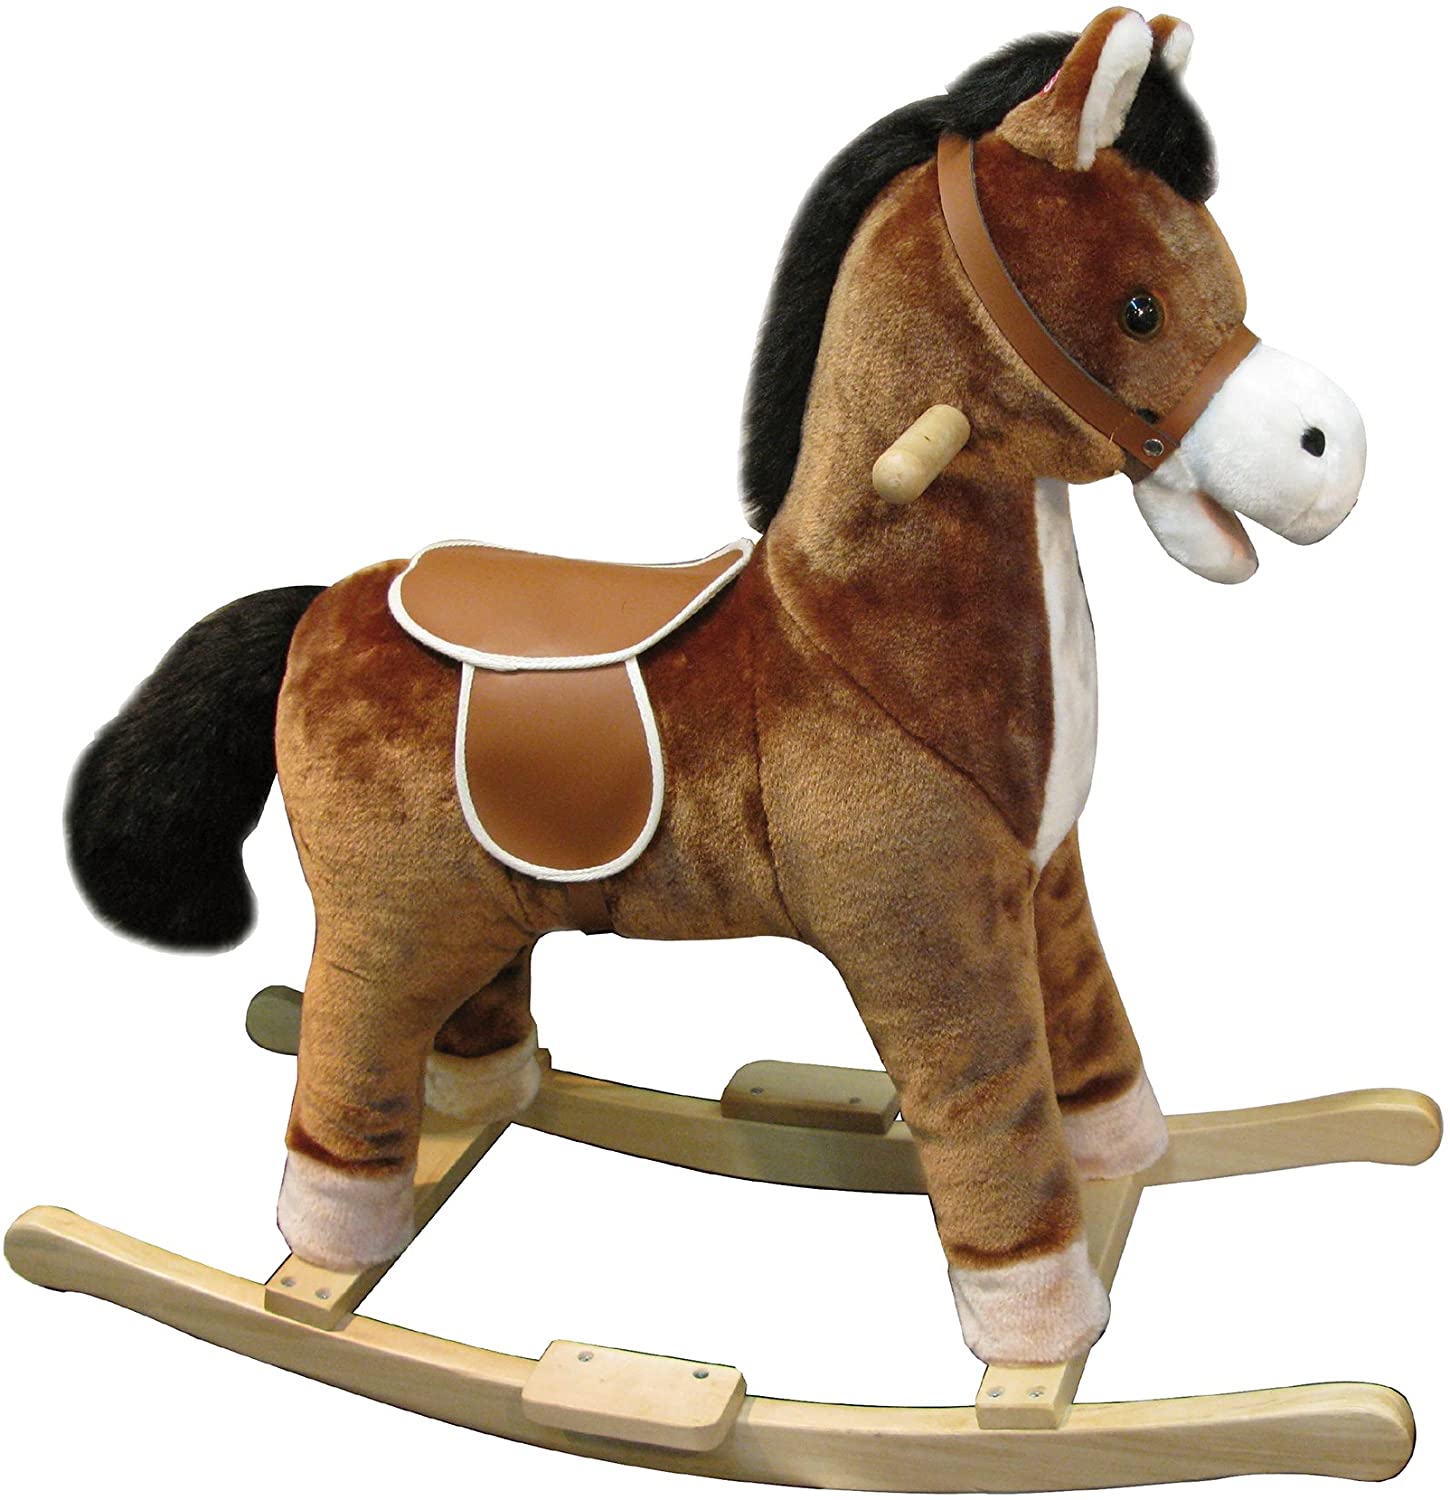 Ods 17003 Rocking Horse With Sound